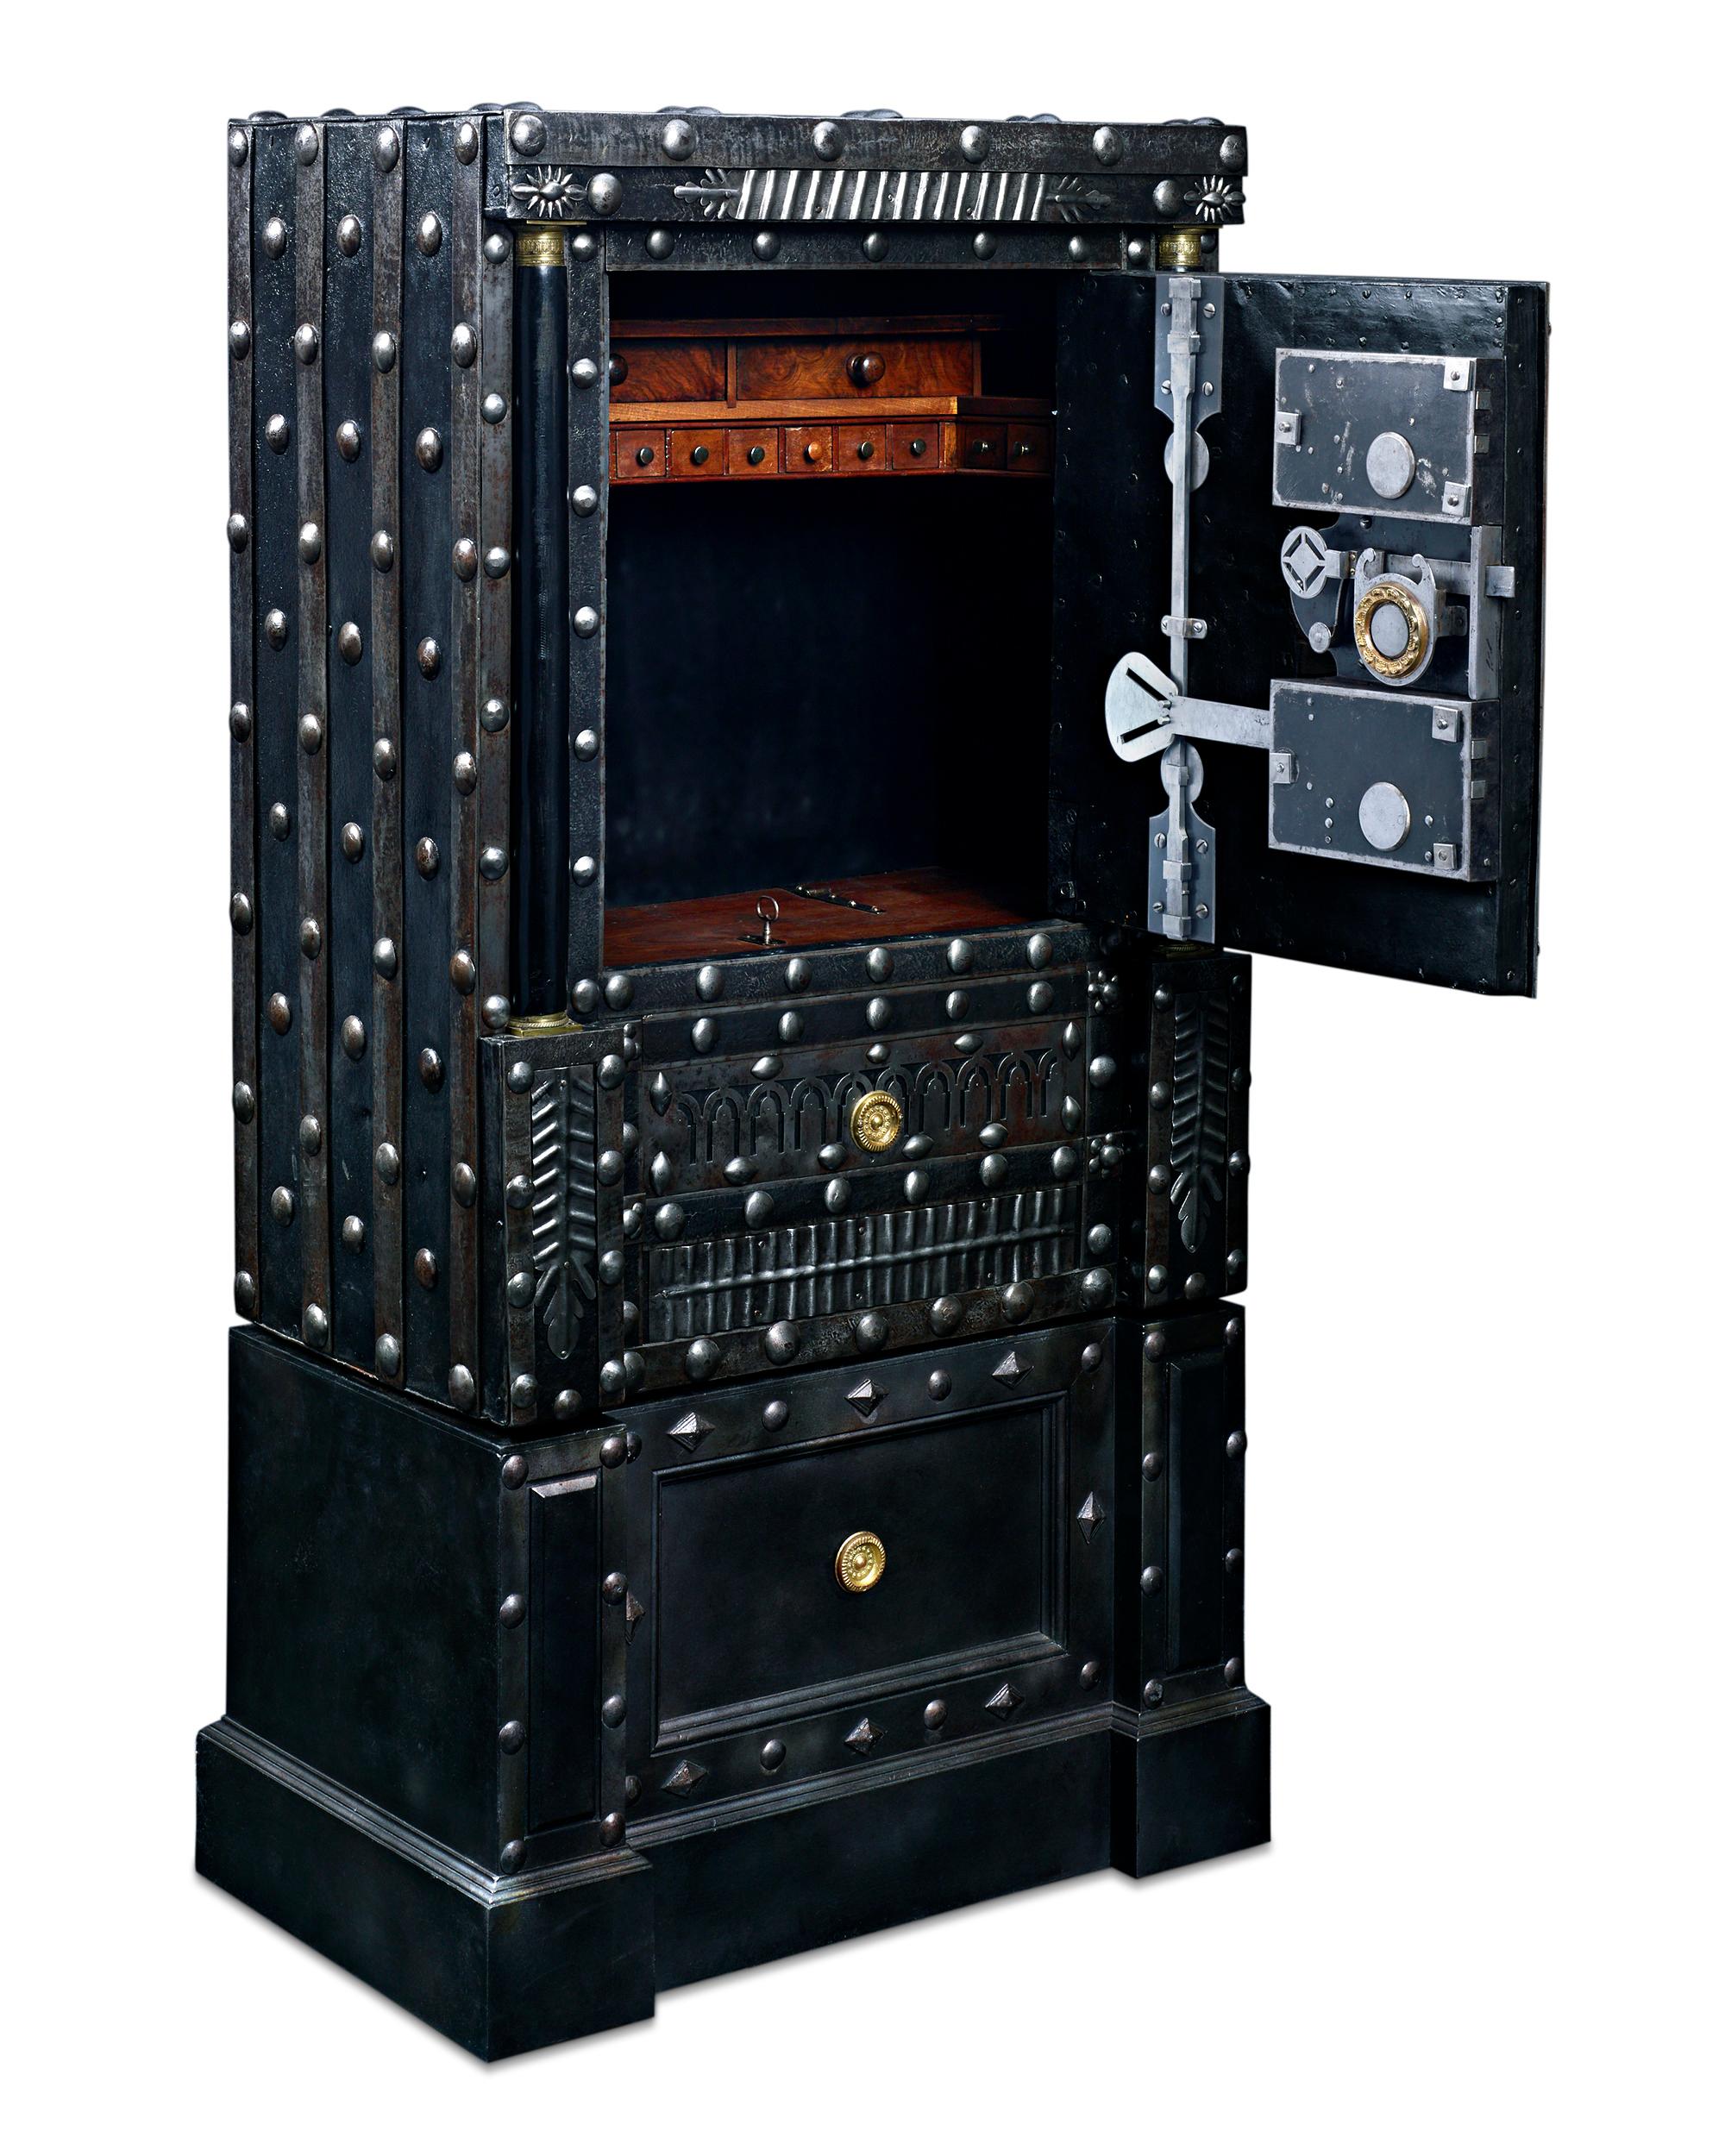 Size, security and exceptional craftsmanship distinguish this fully functioning 19th-century Italian floor safe from Genoa. Weighing hundreds of pounds, the fascinating safe is enveloped with thick iron plates and features one of the most intricate